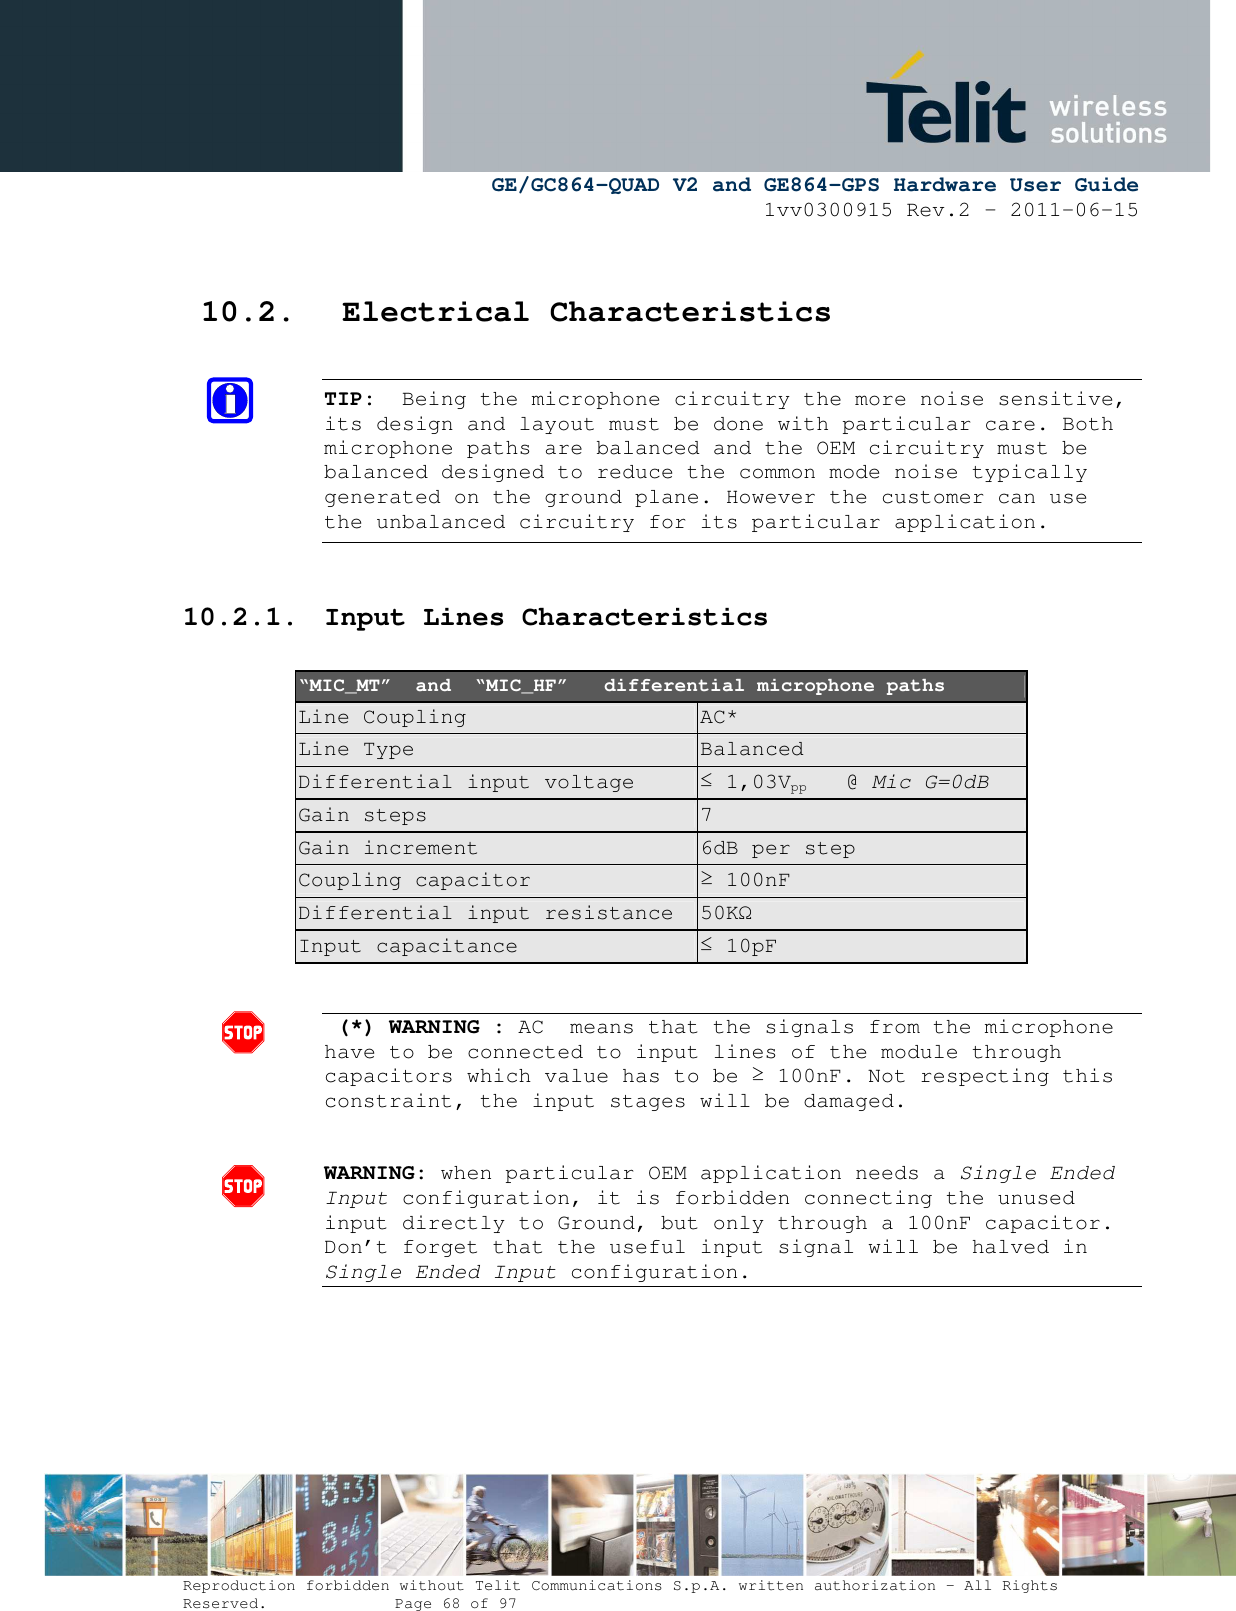      GE/GC864-QUAD V2 and GE864-GPS Hardware User Guide 1vv0300915 Rev.2 – 2011-06-15  Reproduction forbidden without Telit Communications S.p.A. written authorization - All Rights Reserved.    Page 68 of 97   10.2. Electrical Characteristics  TIP:  Being the microphone circuitry the more noise sensitive, its design and layout must be done with particular care. Both microphone paths are balanced and the OEM circuitry must be balanced designed to reduce the common mode noise typically generated on the ground plane. However the customer can use the unbalanced circuitry for its particular application.  10.2.1. Input Lines Characteristics  “MIC_MT”  and  “MIC_HF”   differential microphone paths Line Coupling  AC* Line Type  Balanced Differential input voltage  ≤ 1,03Vpp   @ Mic G=0dB Gain steps  7 Gain increment  6dB per step Coupling capacitor  ≥ 100nF Differential input resistance  50KΩ Input capacitance  ≤ 10pF    (*) WARNING : AC  means that the signals from the microphone have to be connected to input lines of the module through capacitors which value has to be ≥ 100nF. Not respecting this constraint, the input stages will be damaged.   WARNING: when particular OEM application needs a Single Ended Input configuration, it is forbidden connecting the unused input directly to Ground, but only through a 100nF capacitor. Don’t forget that the useful input signal will be halved in Single Ended Input configuration.       